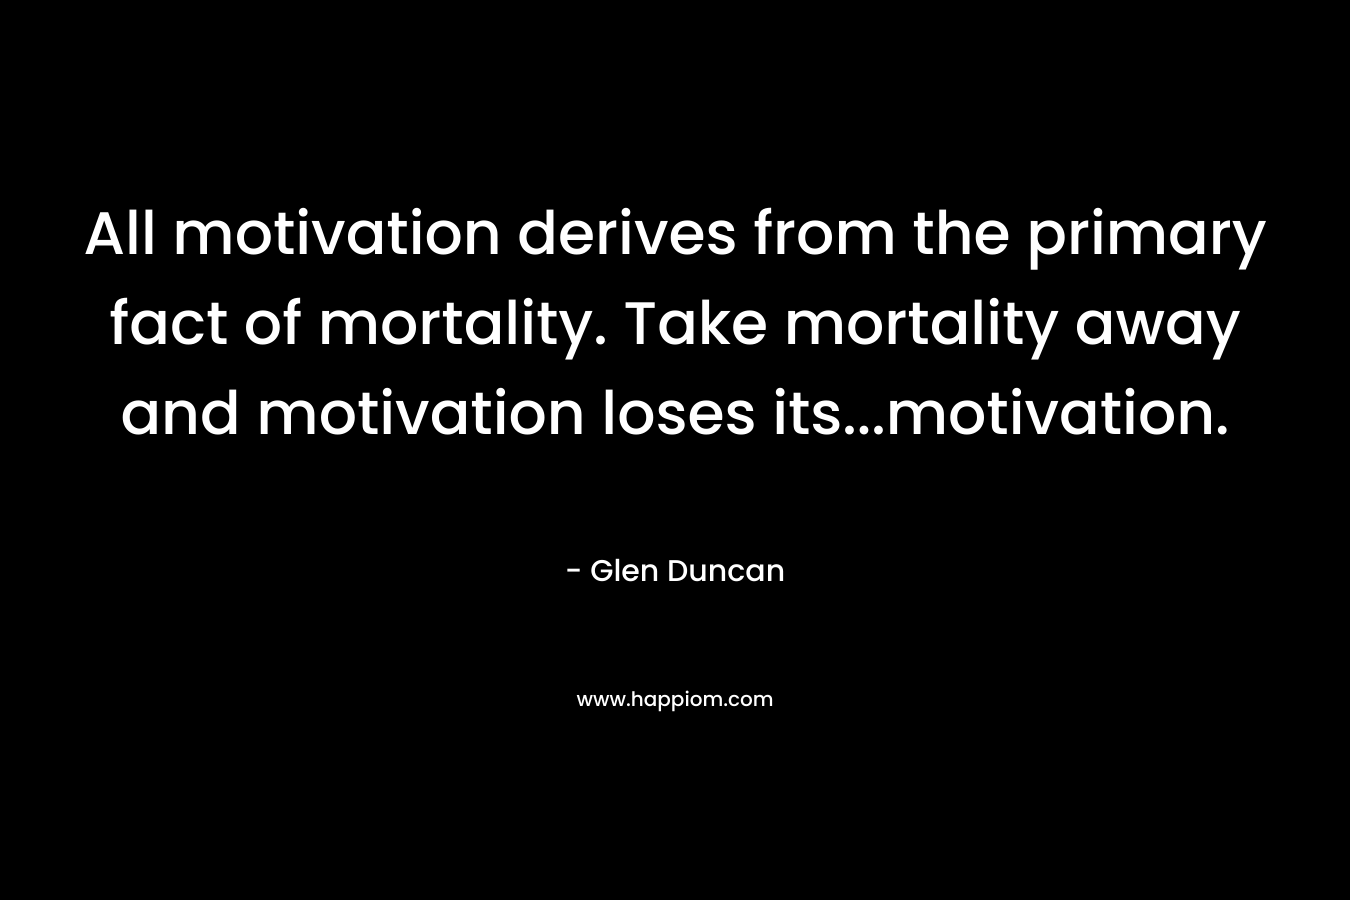 All motivation derives from the primary fact of mortality. Take mortality away and motivation loses its…motivation. – Glen Duncan